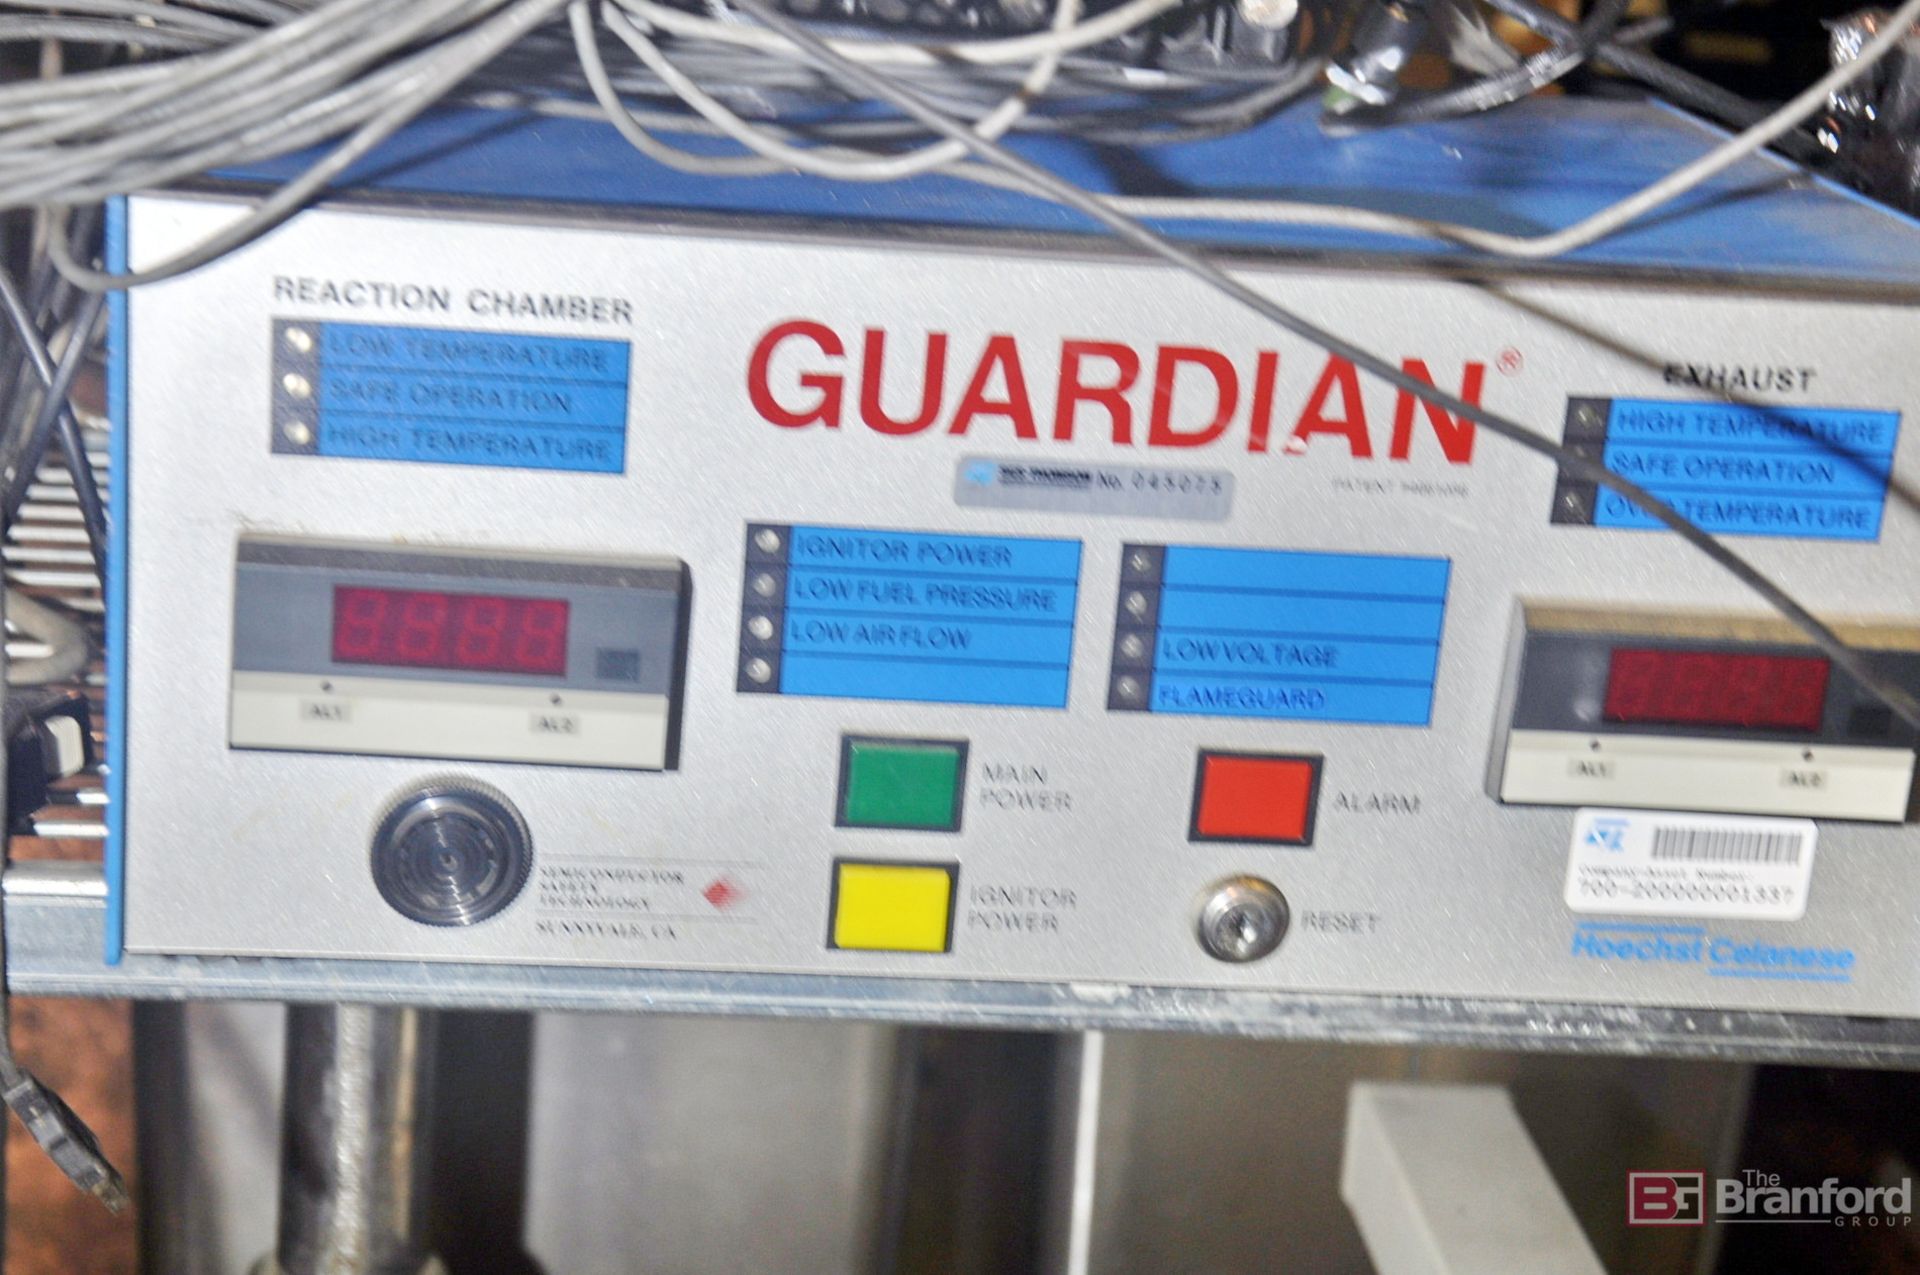 Hoechst Celanese Guardian reactor & exhaust gas monitor system - Image 3 of 8